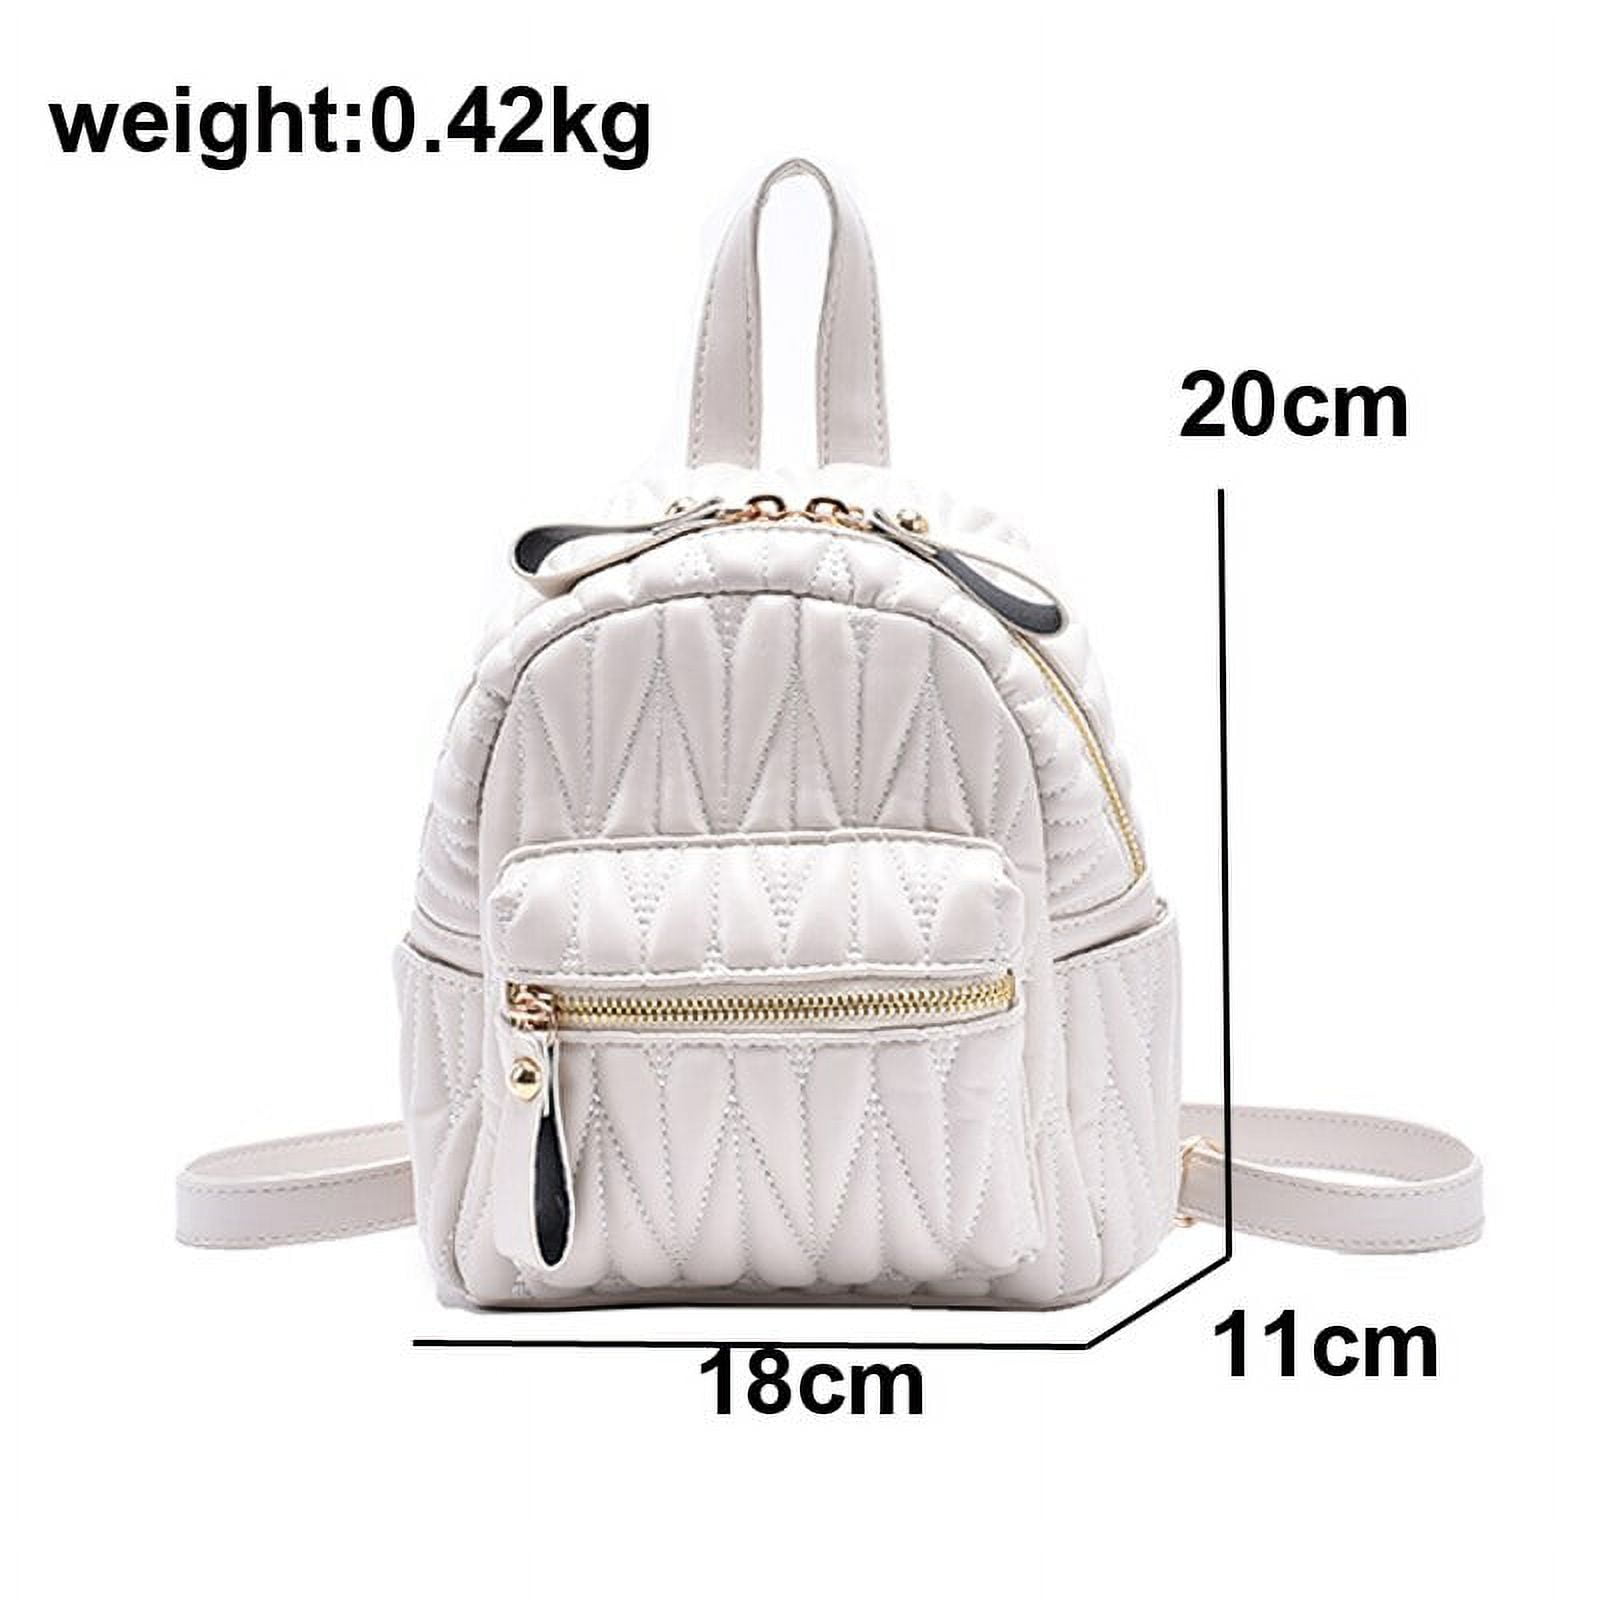 Cocopeaunts High Quality Leather Backpack Bags for Women Winter School Bags for Teenagers Girls Luxury Back Packs Designer Backpack, Kids Unisex, Size